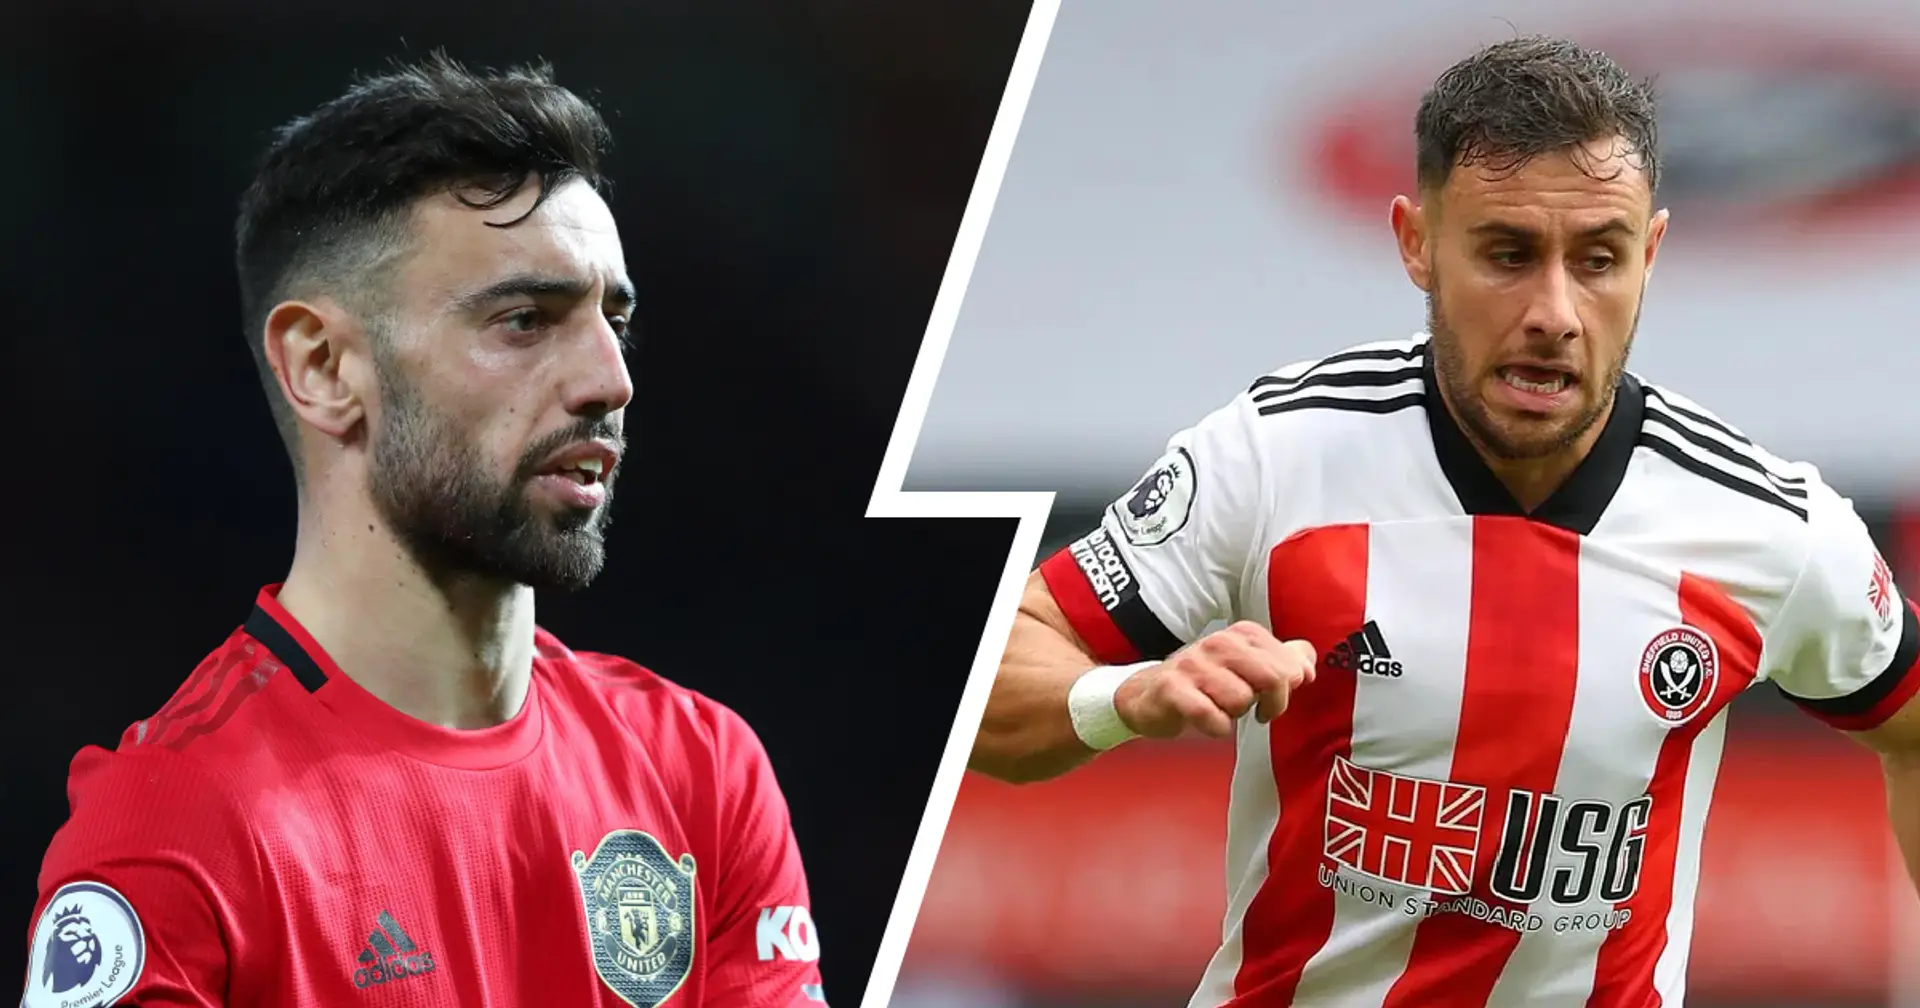 George Baldock pushes Bruno Fernandes twice - and Man United fans are not happy